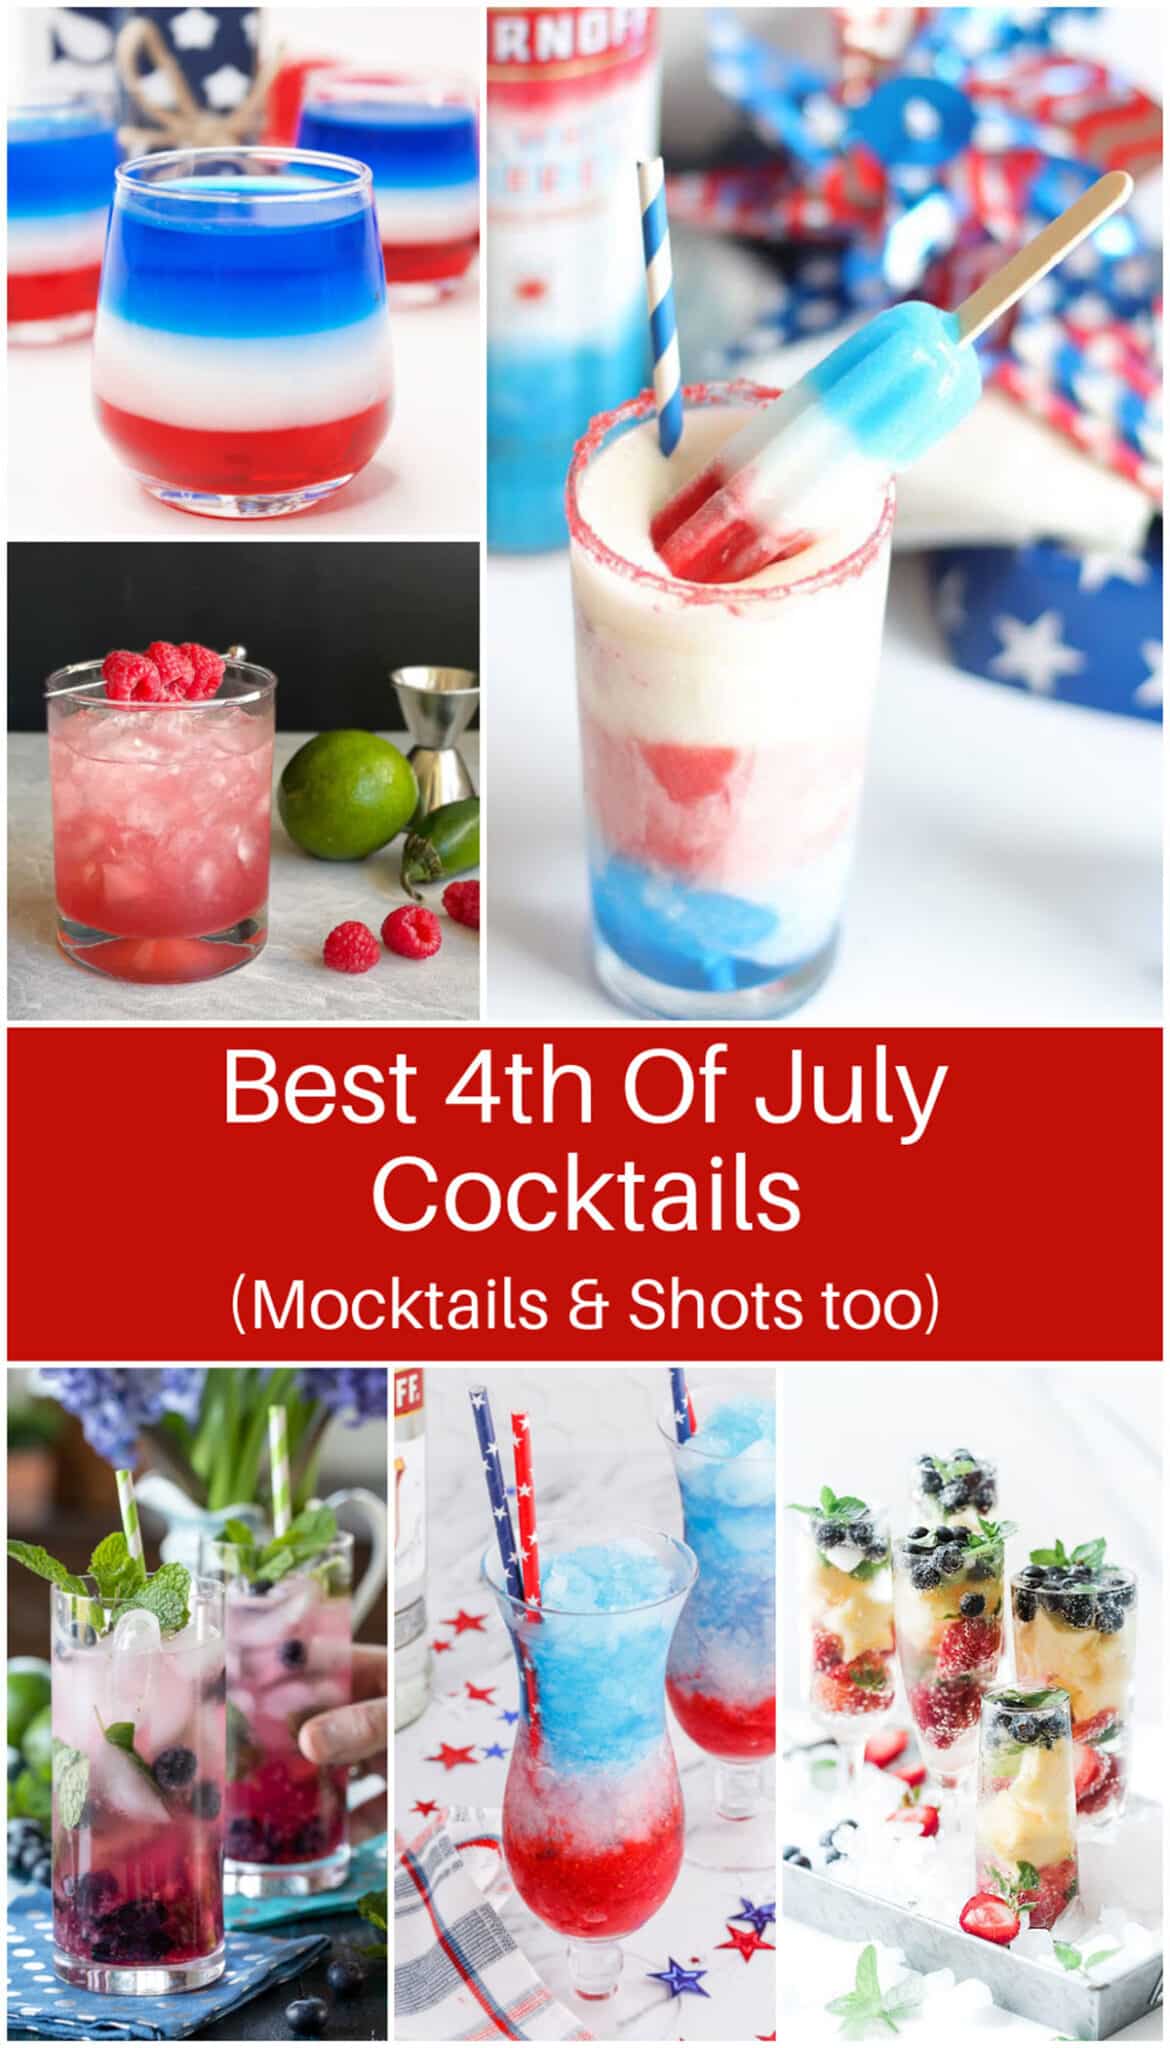 Featuring patriotically colored cocktails, mocktails and shots for the 4th of July holiday.